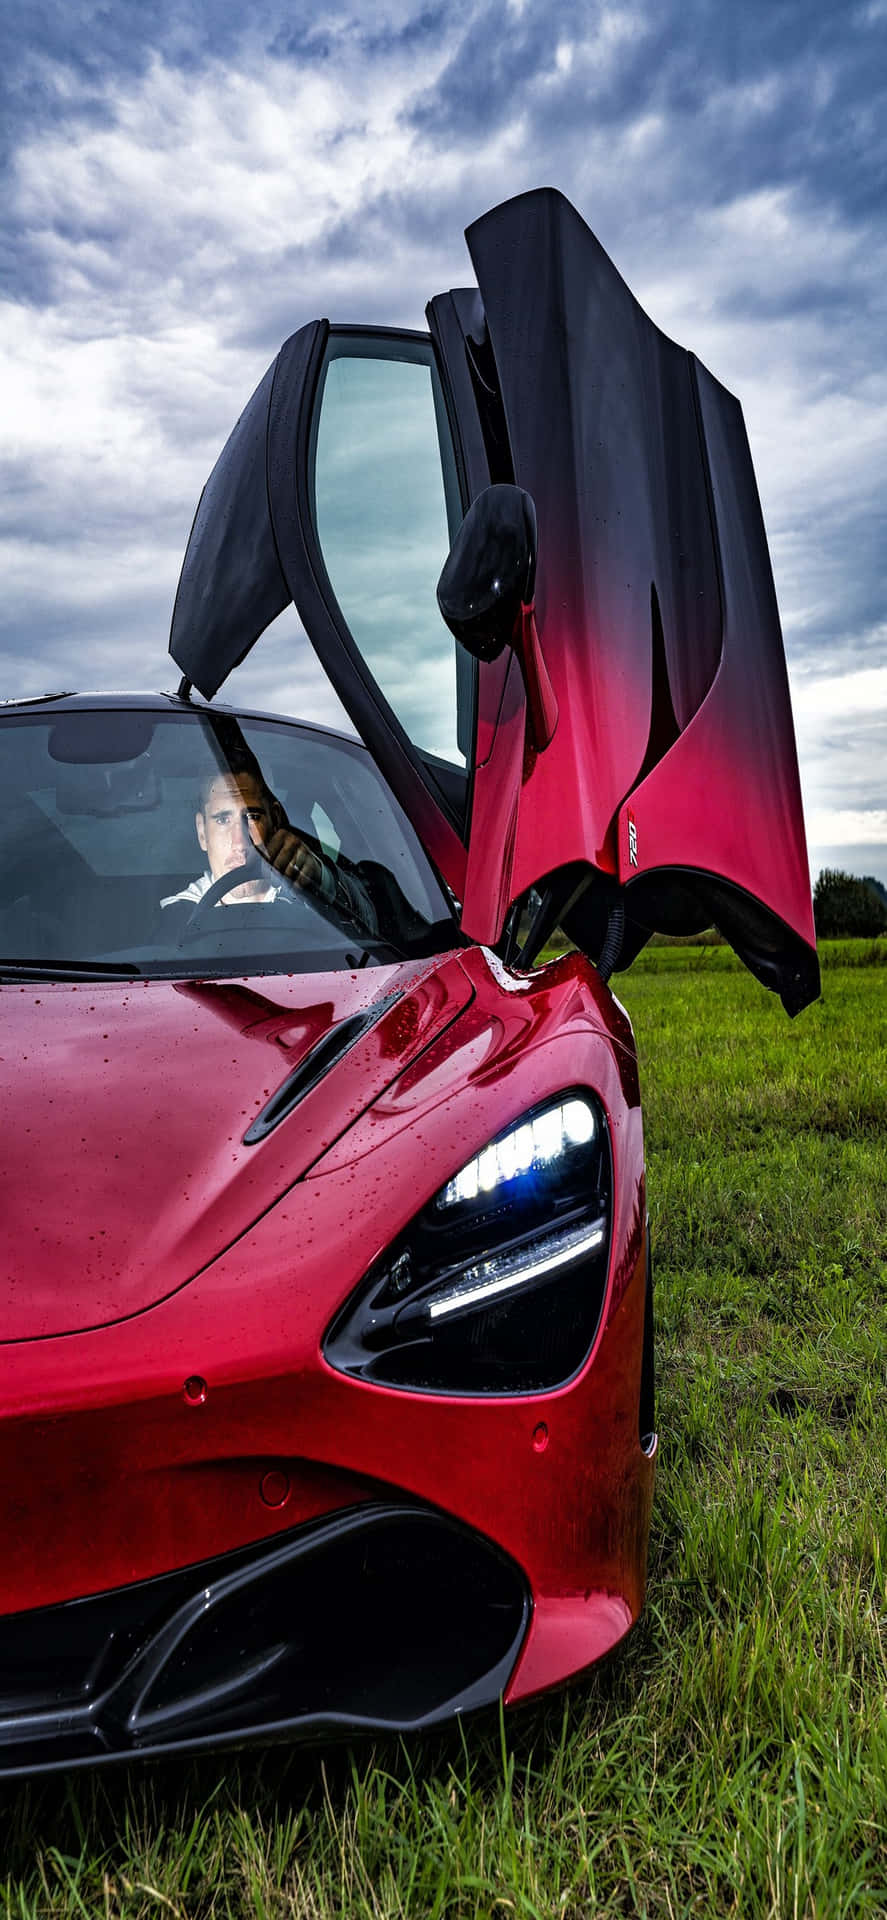 It's a Match! The Iphone X and Mclaren 720s.